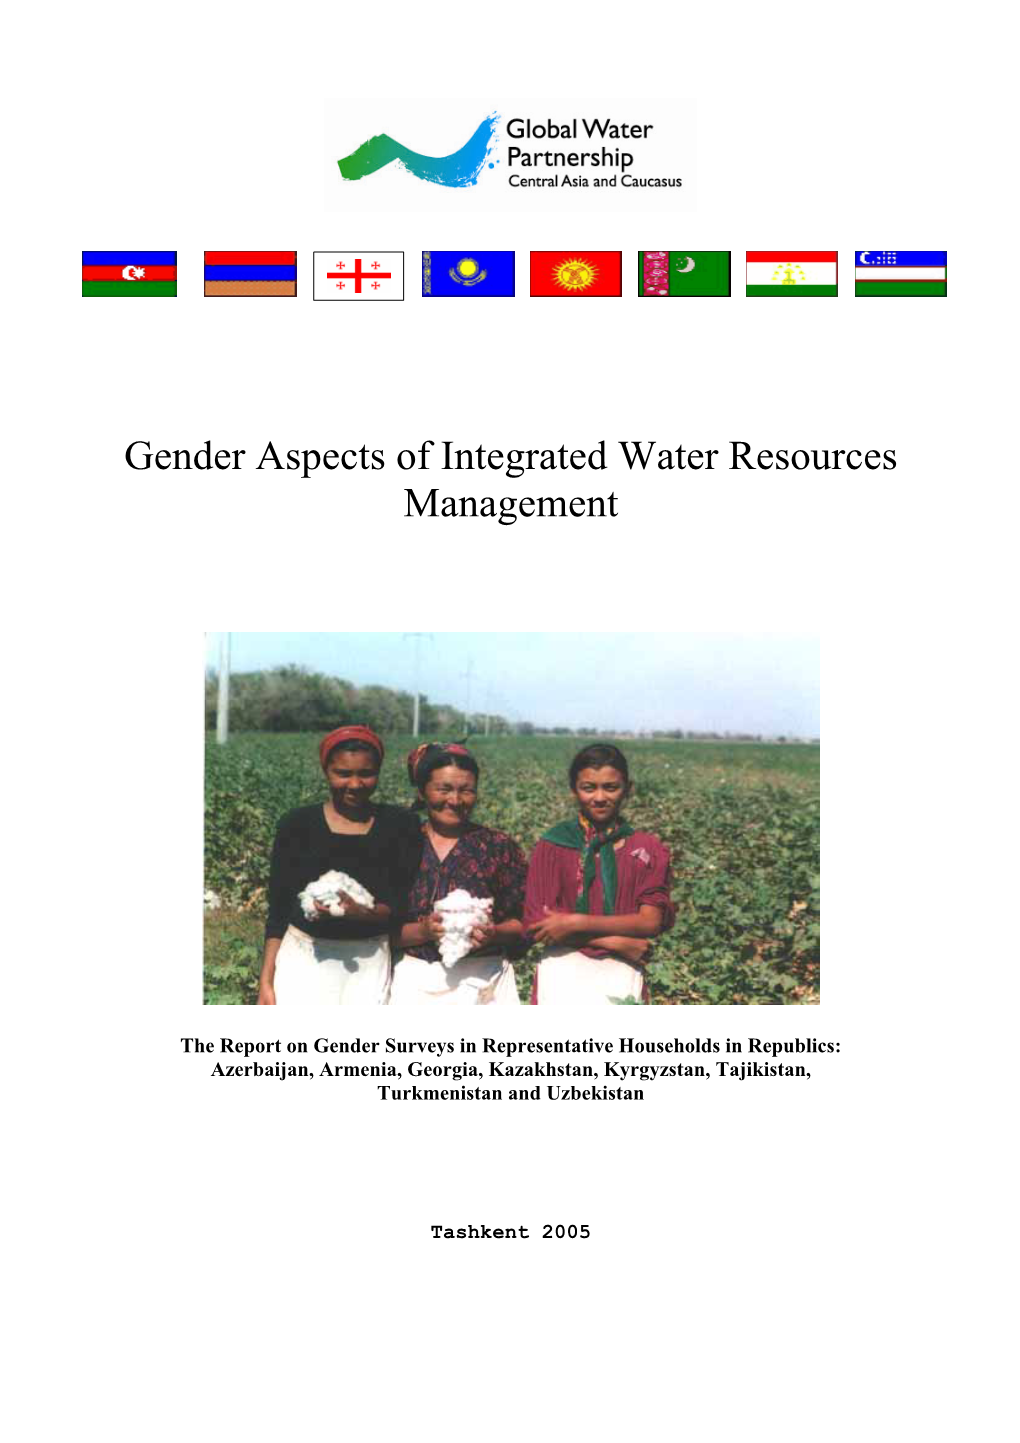 Gender Aspects of Integrated Water Resources Management (GWP